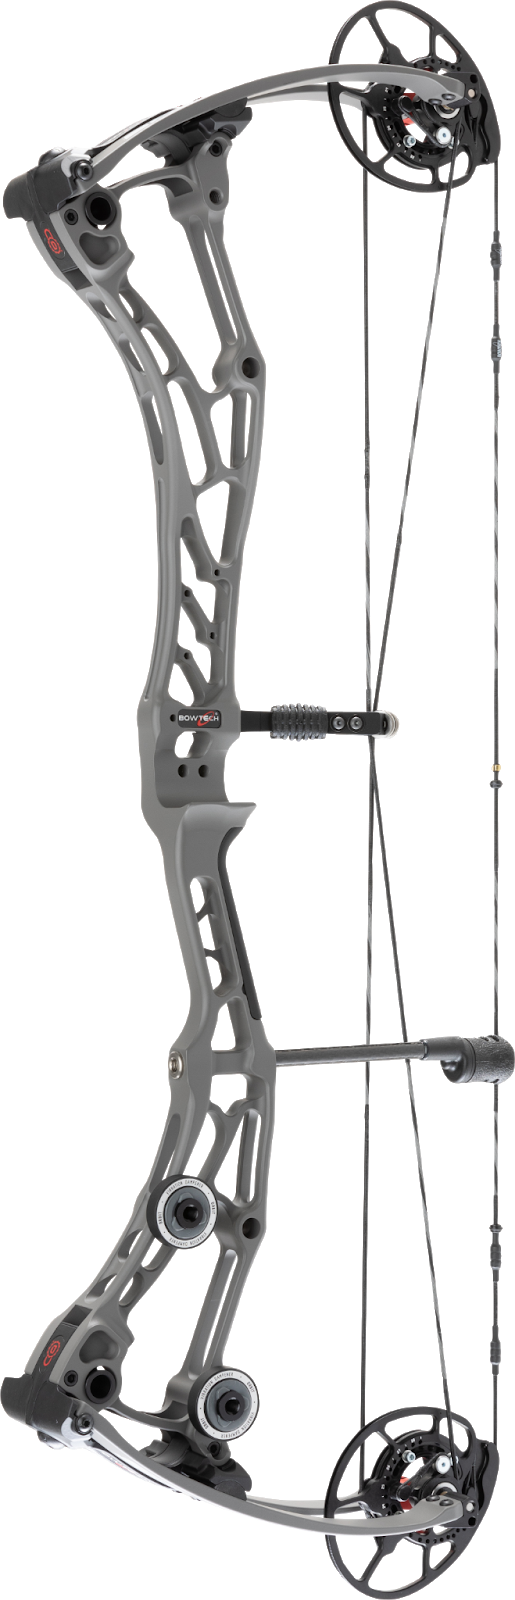 Bowtech Solution SD hunting bow